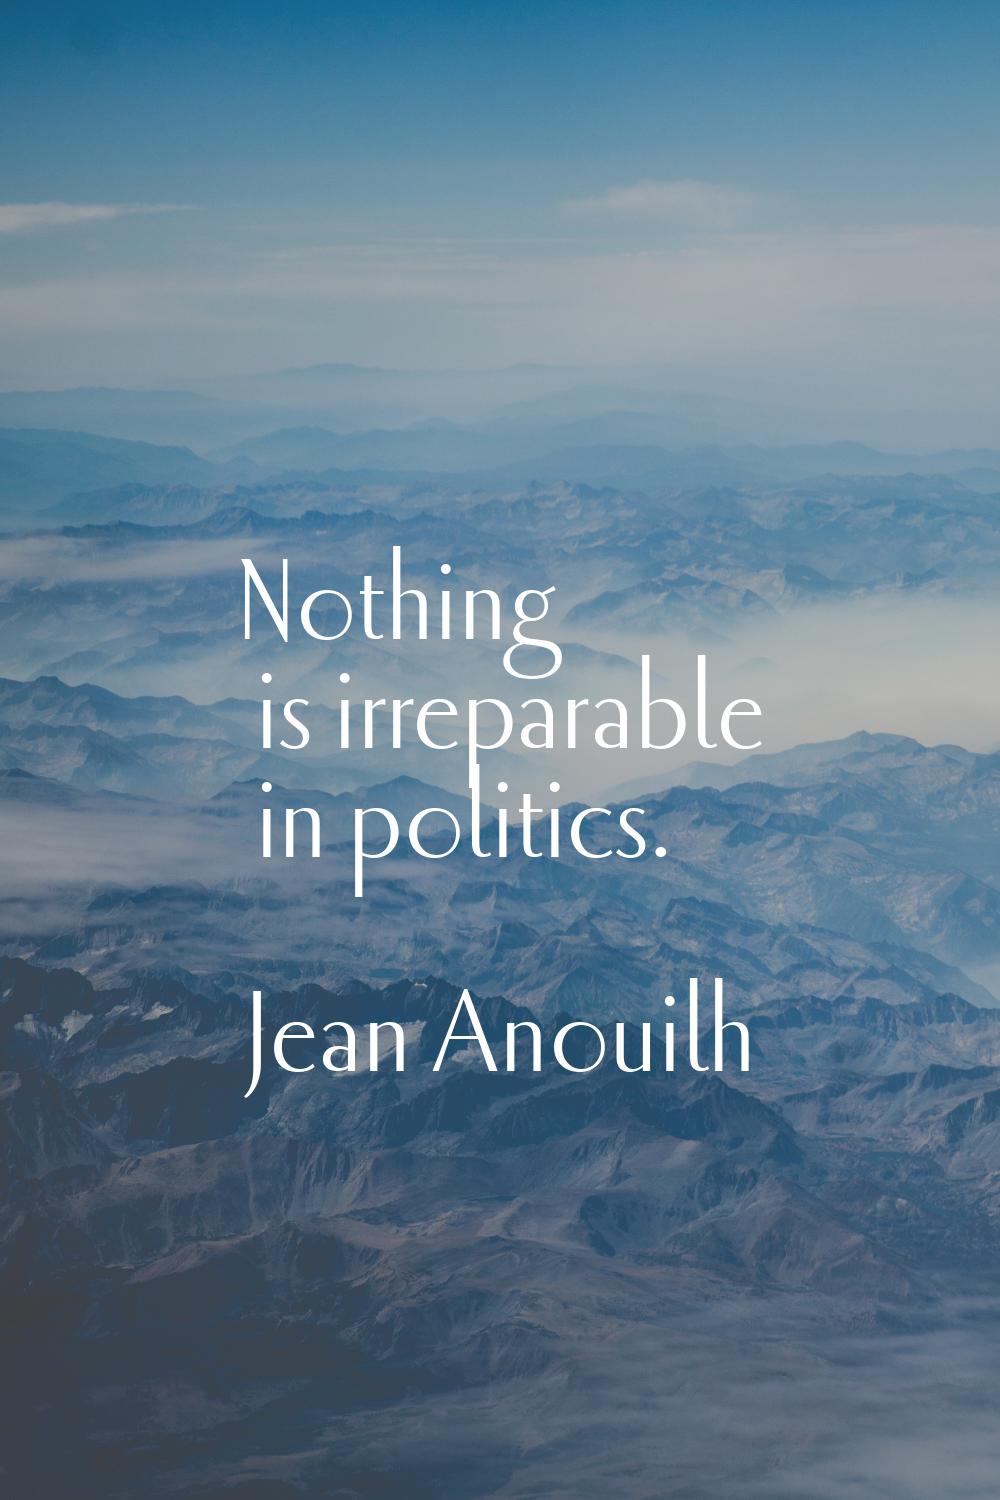 Nothing is irreparable in politics.